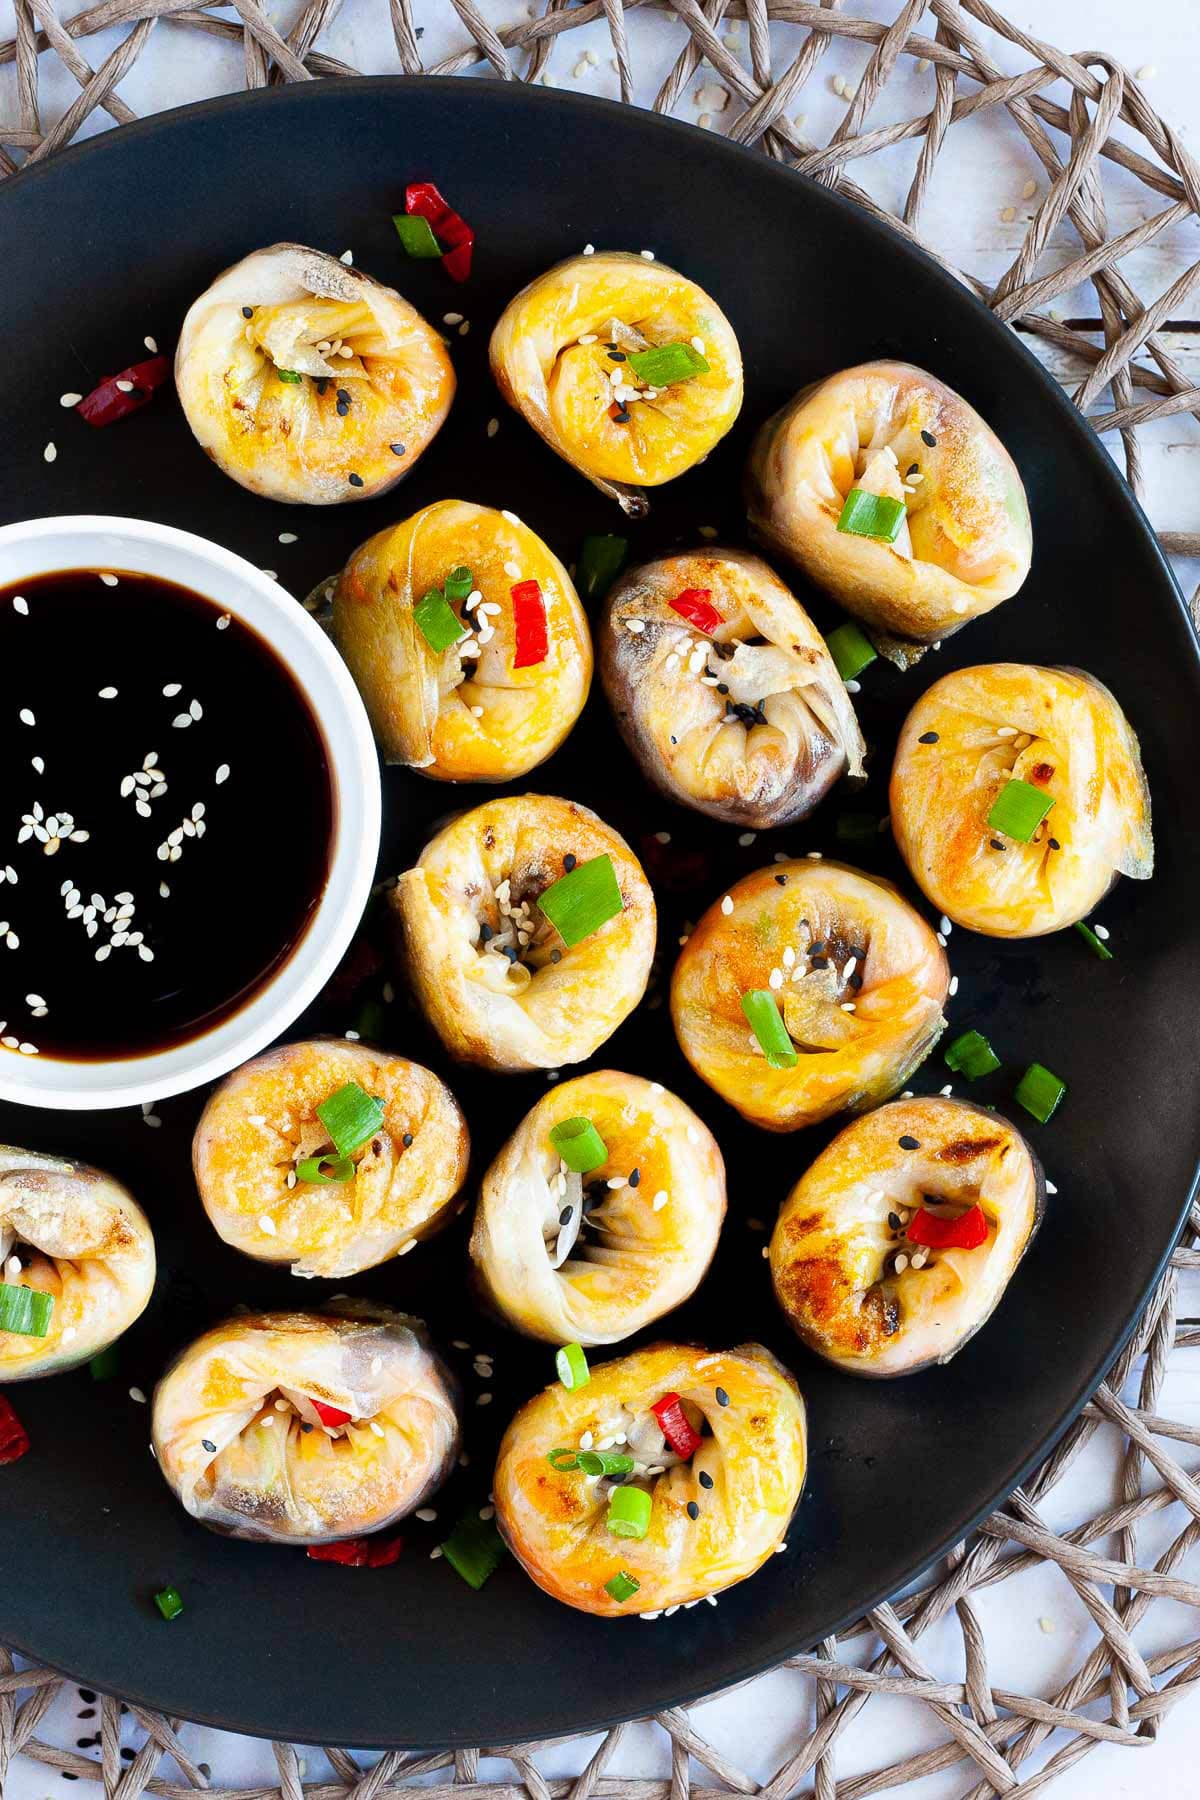 Lots of round-shaped rice paper dumplings arranged in a semi-circular dish facing upwards sprinkled with sesame seeds, chopped spring onion and red hot pepper around a brown dipping sauce.